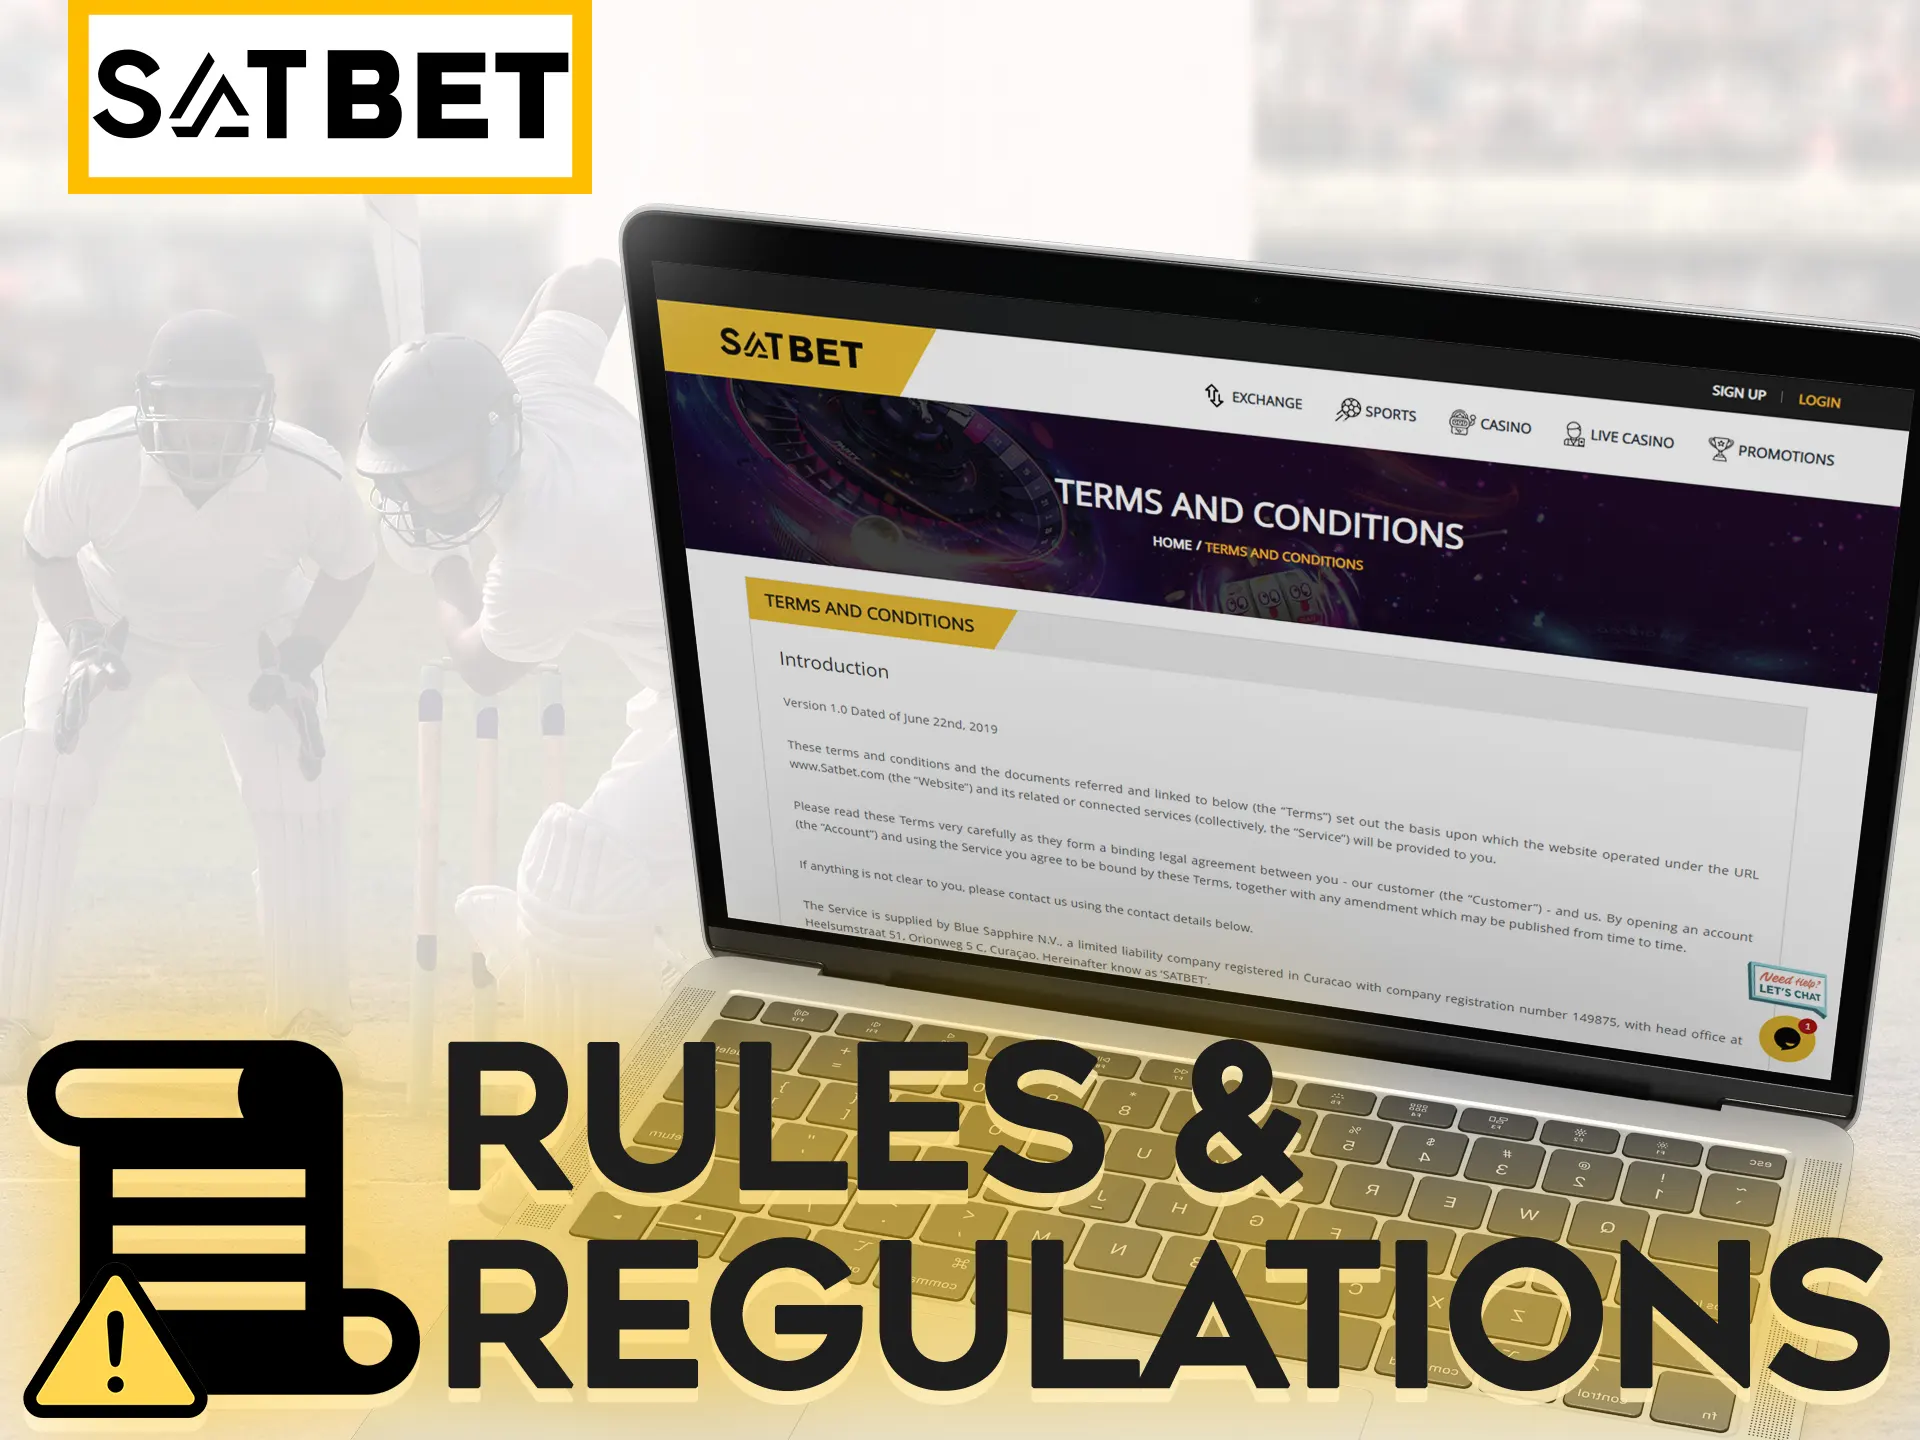 Follow Satbet rules when making bets and playing casino games.